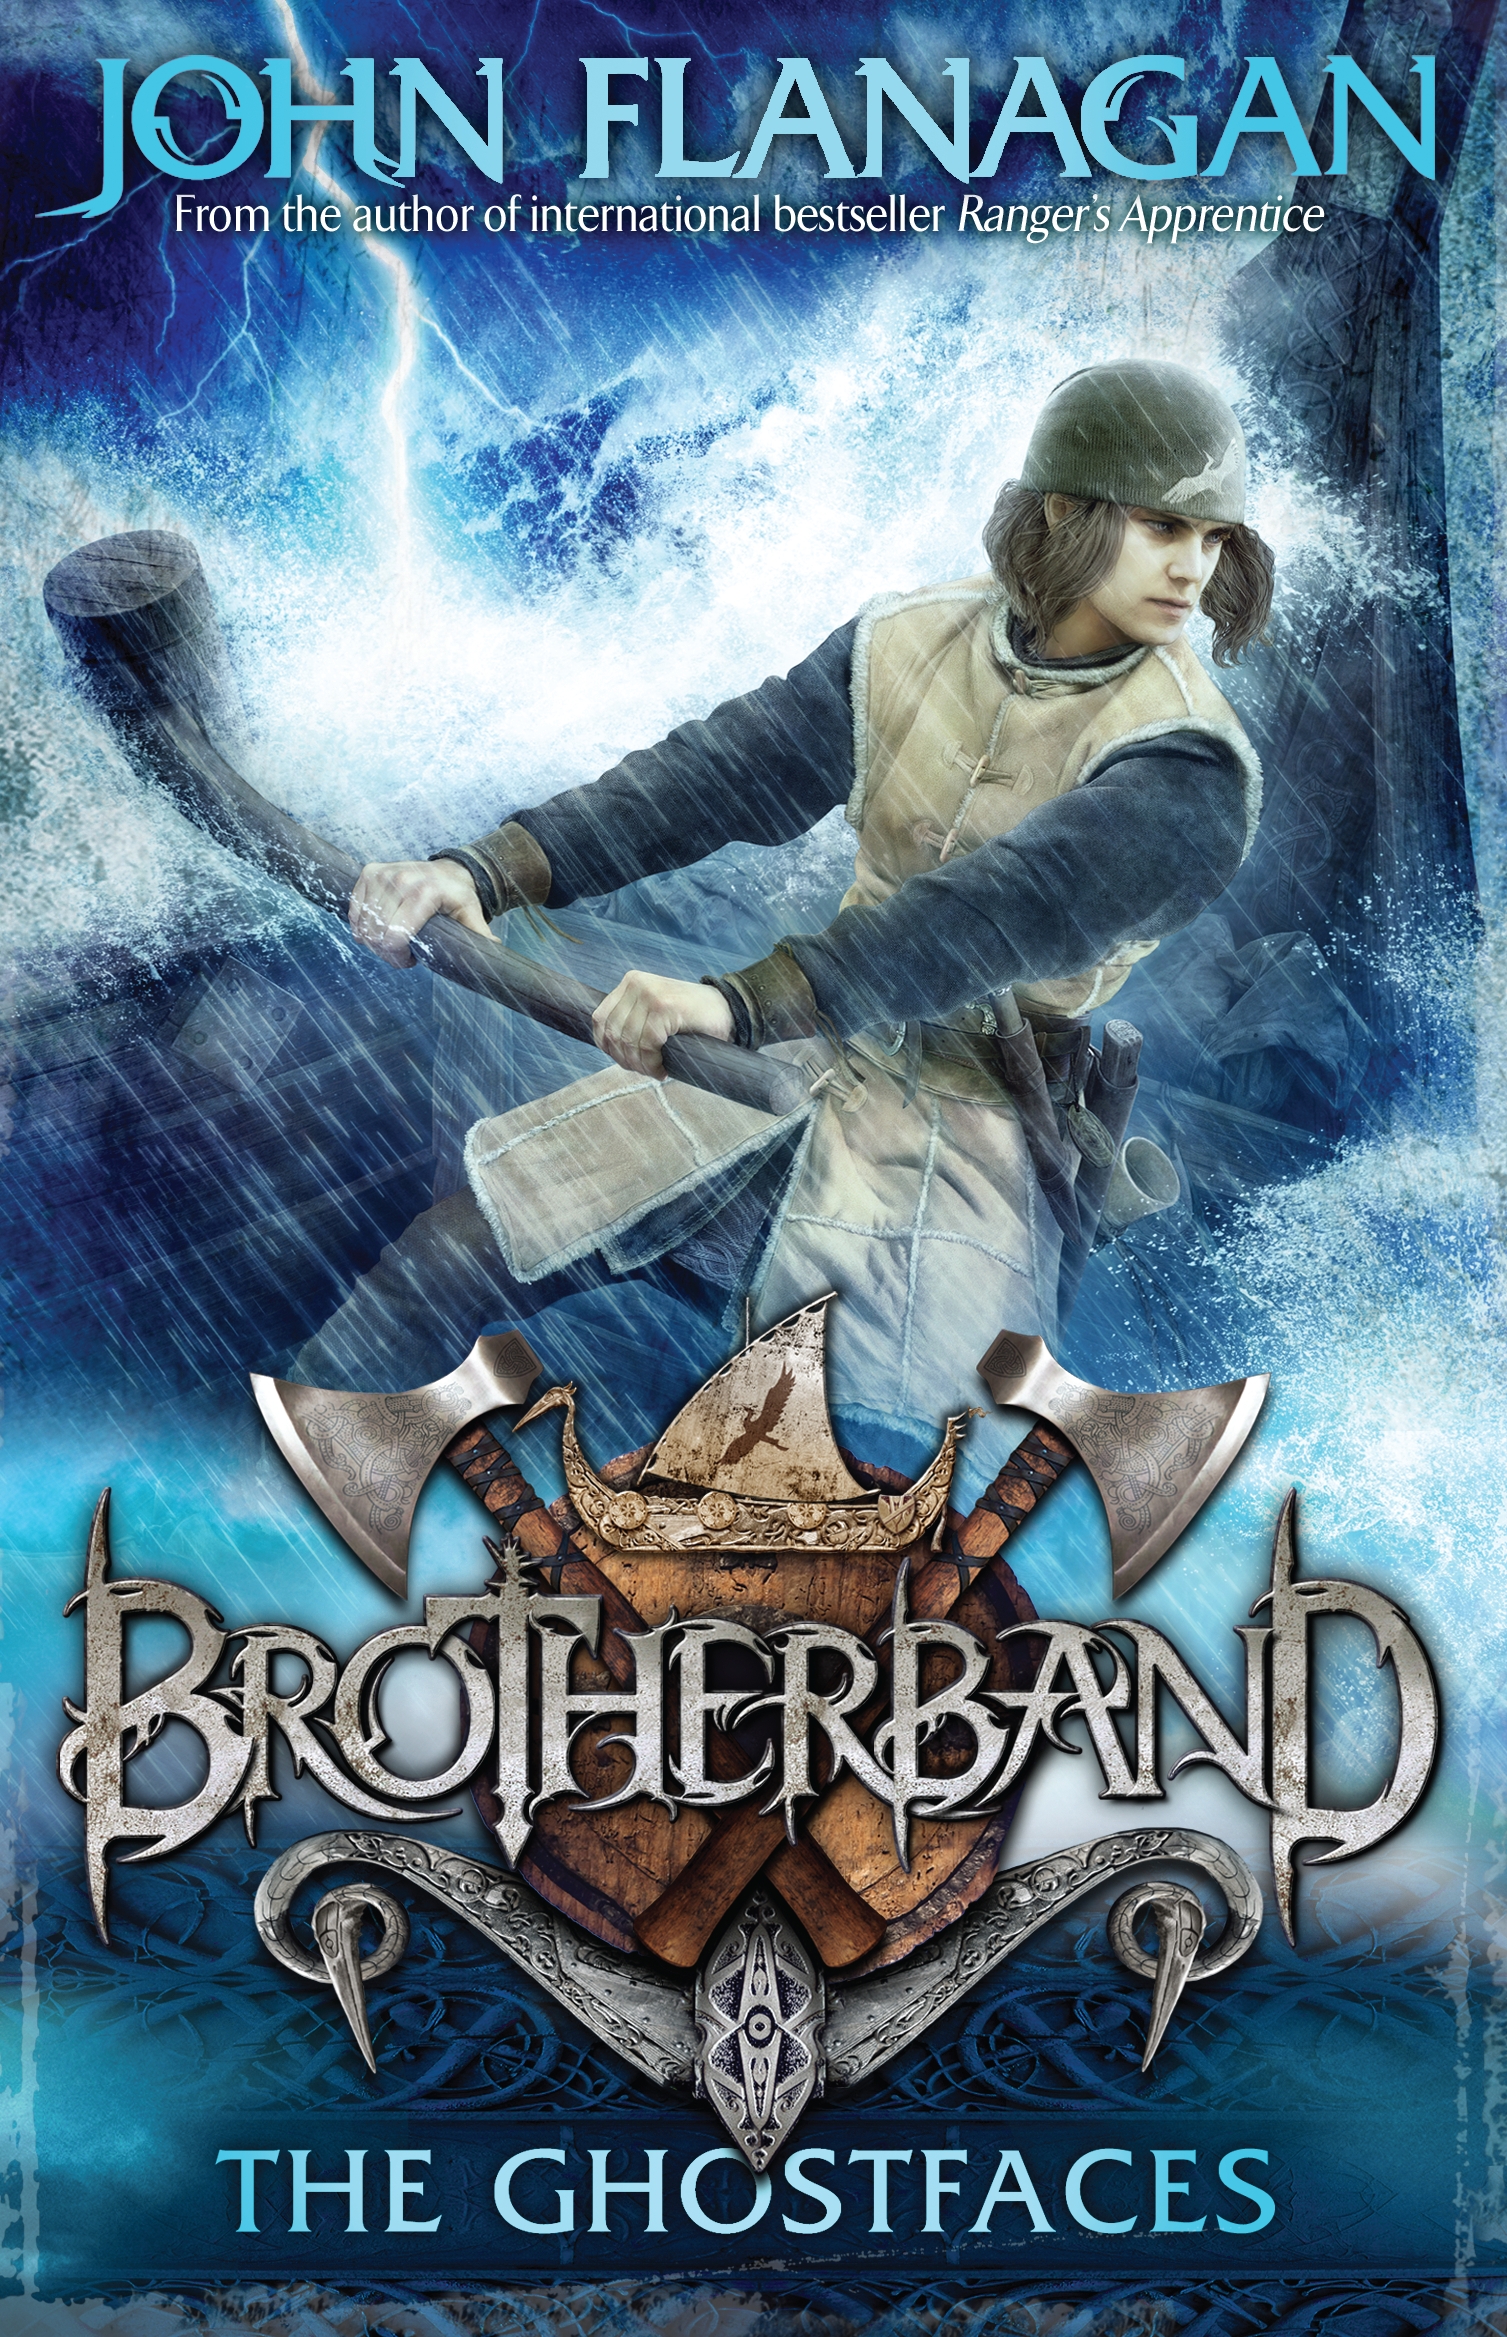 The brotherband